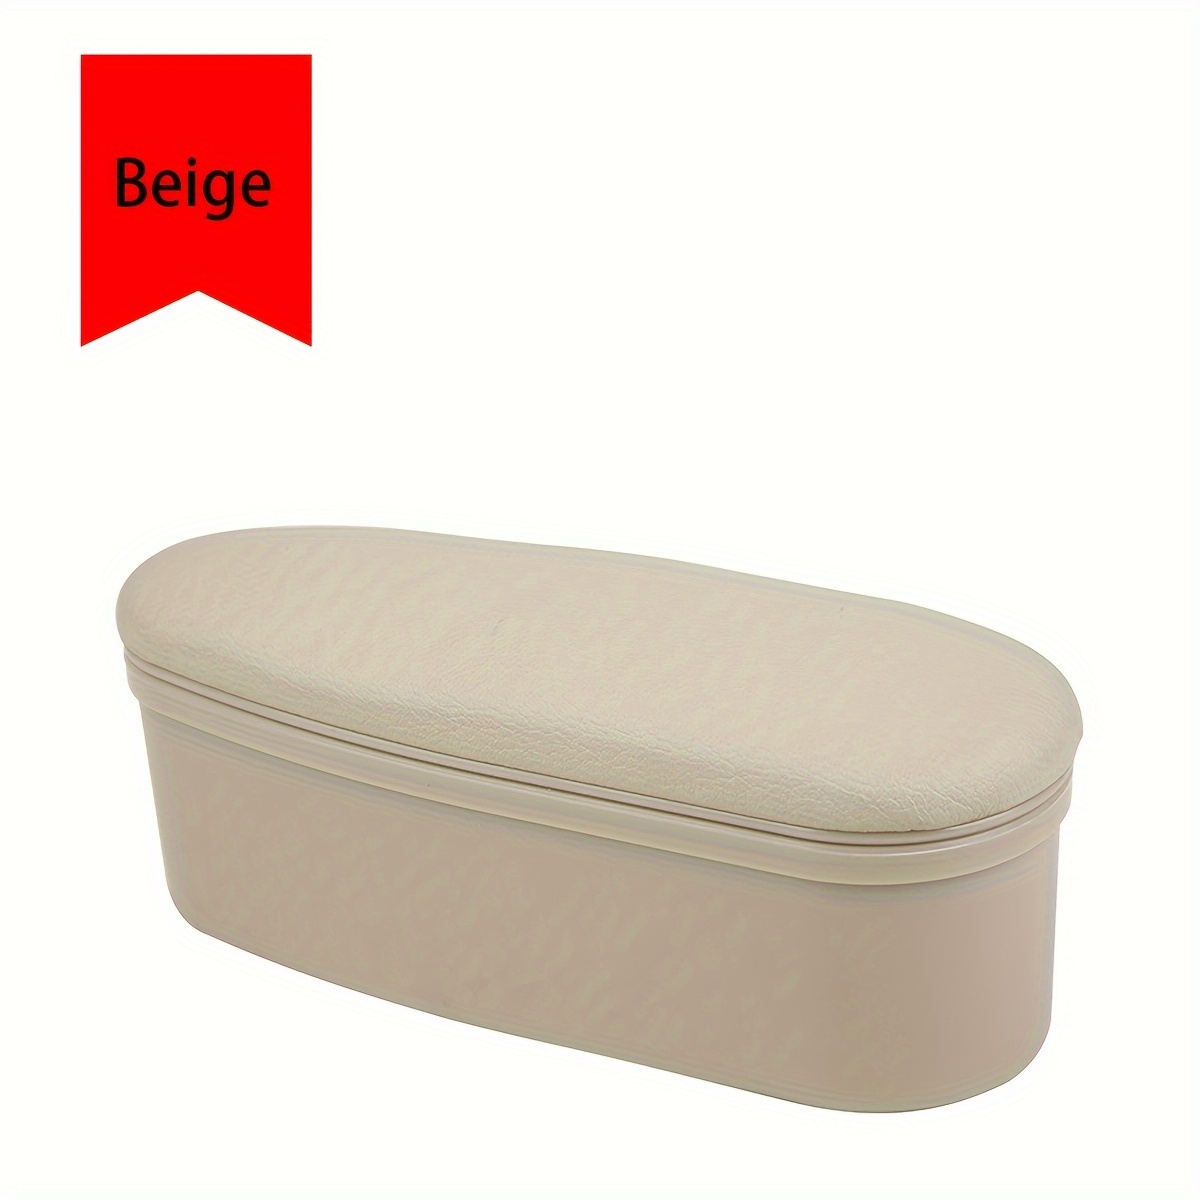 1pc Beige Turnover Leather Strap Padded Armrest Box Cushion With